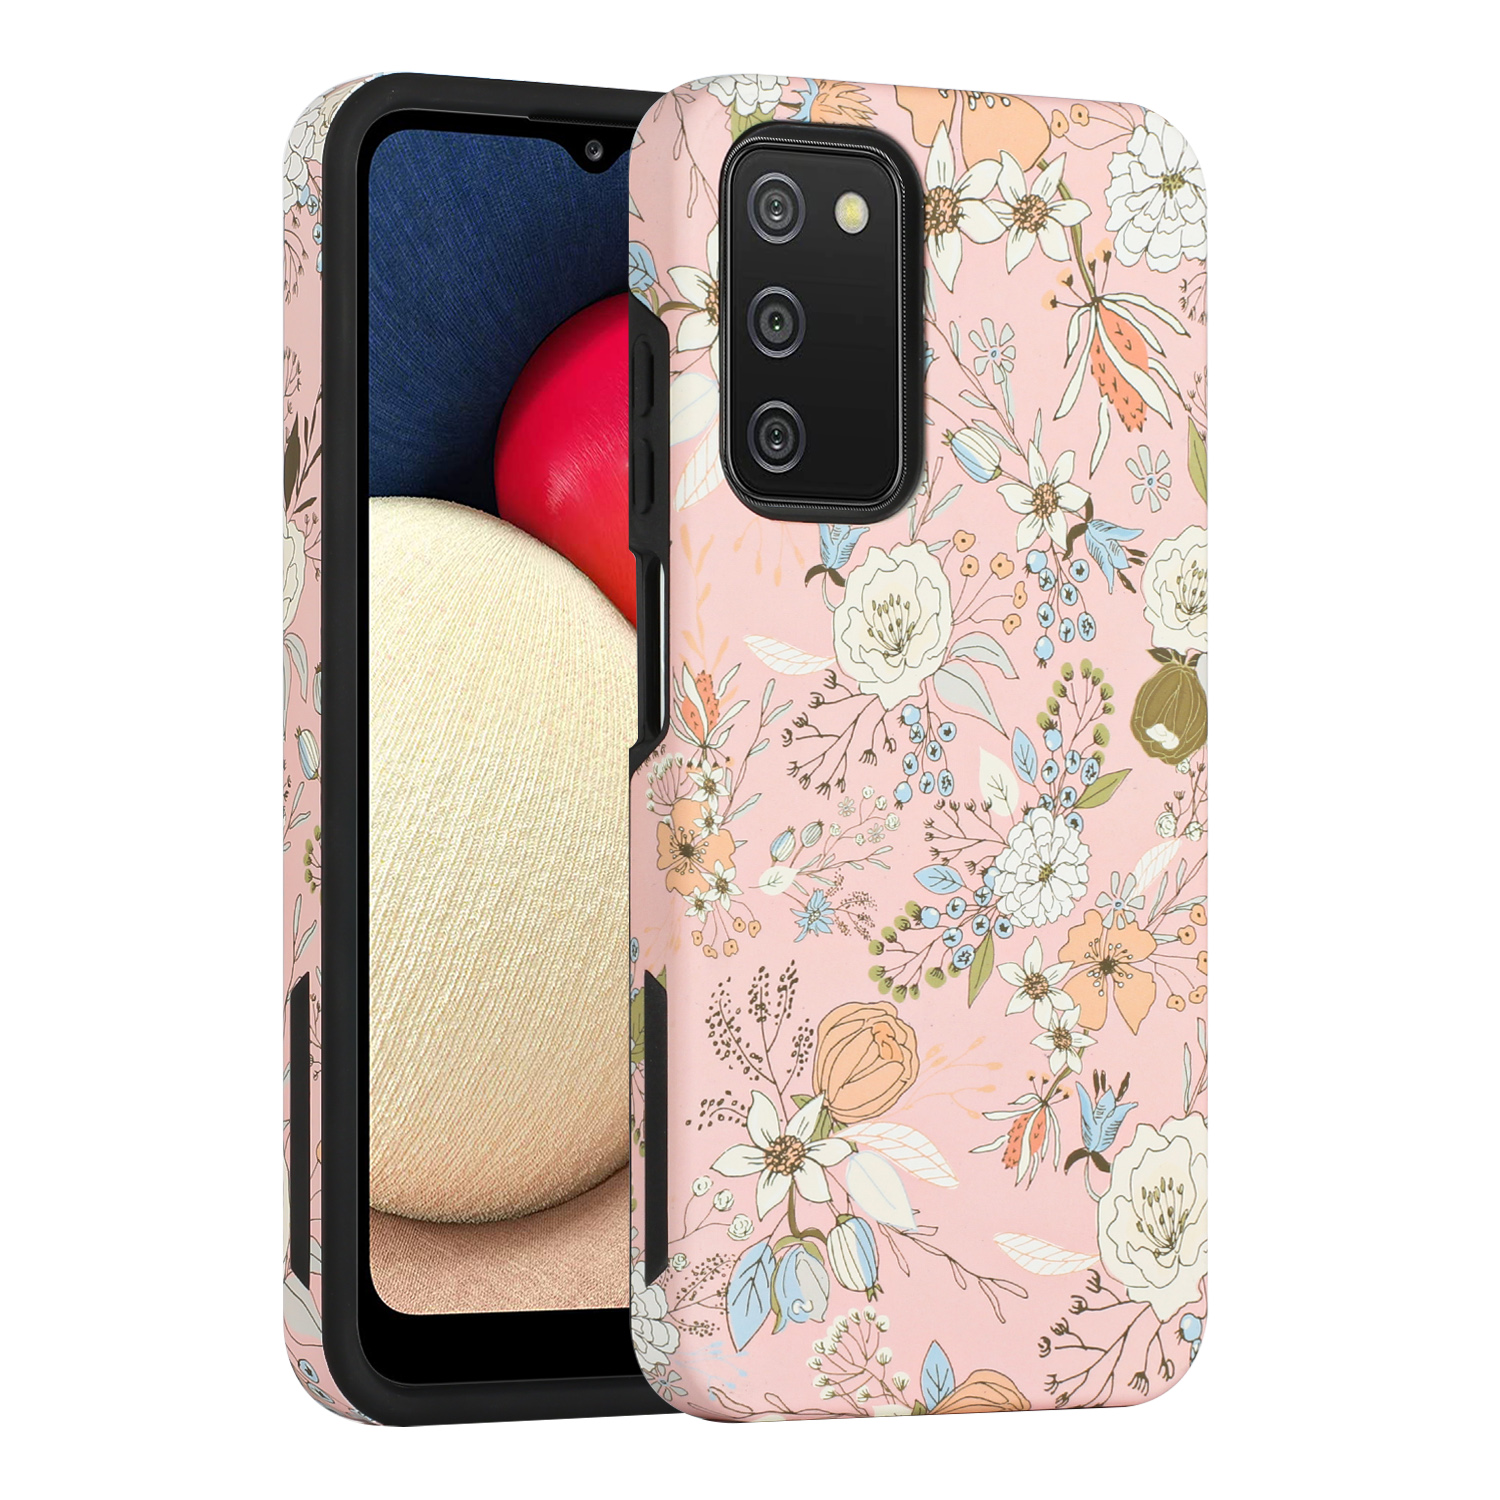 Glossy Design Dual Layer Armor Case Cover for Galaxy A03s (FLOWER)